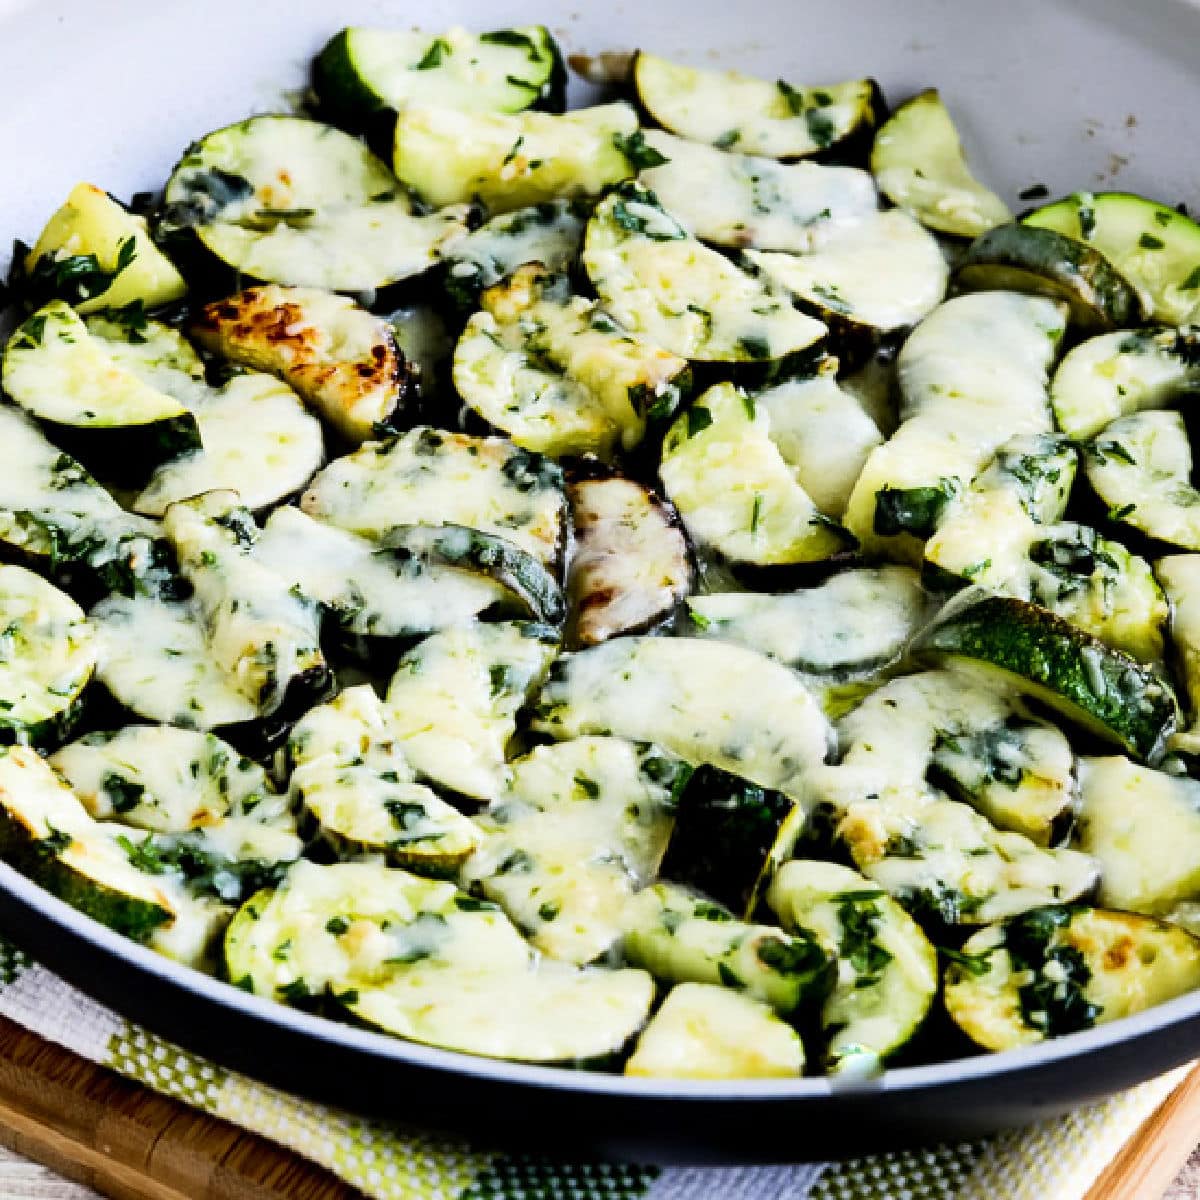 Cheesy Zucchini with Garlic and Parsley shown in frying pan.